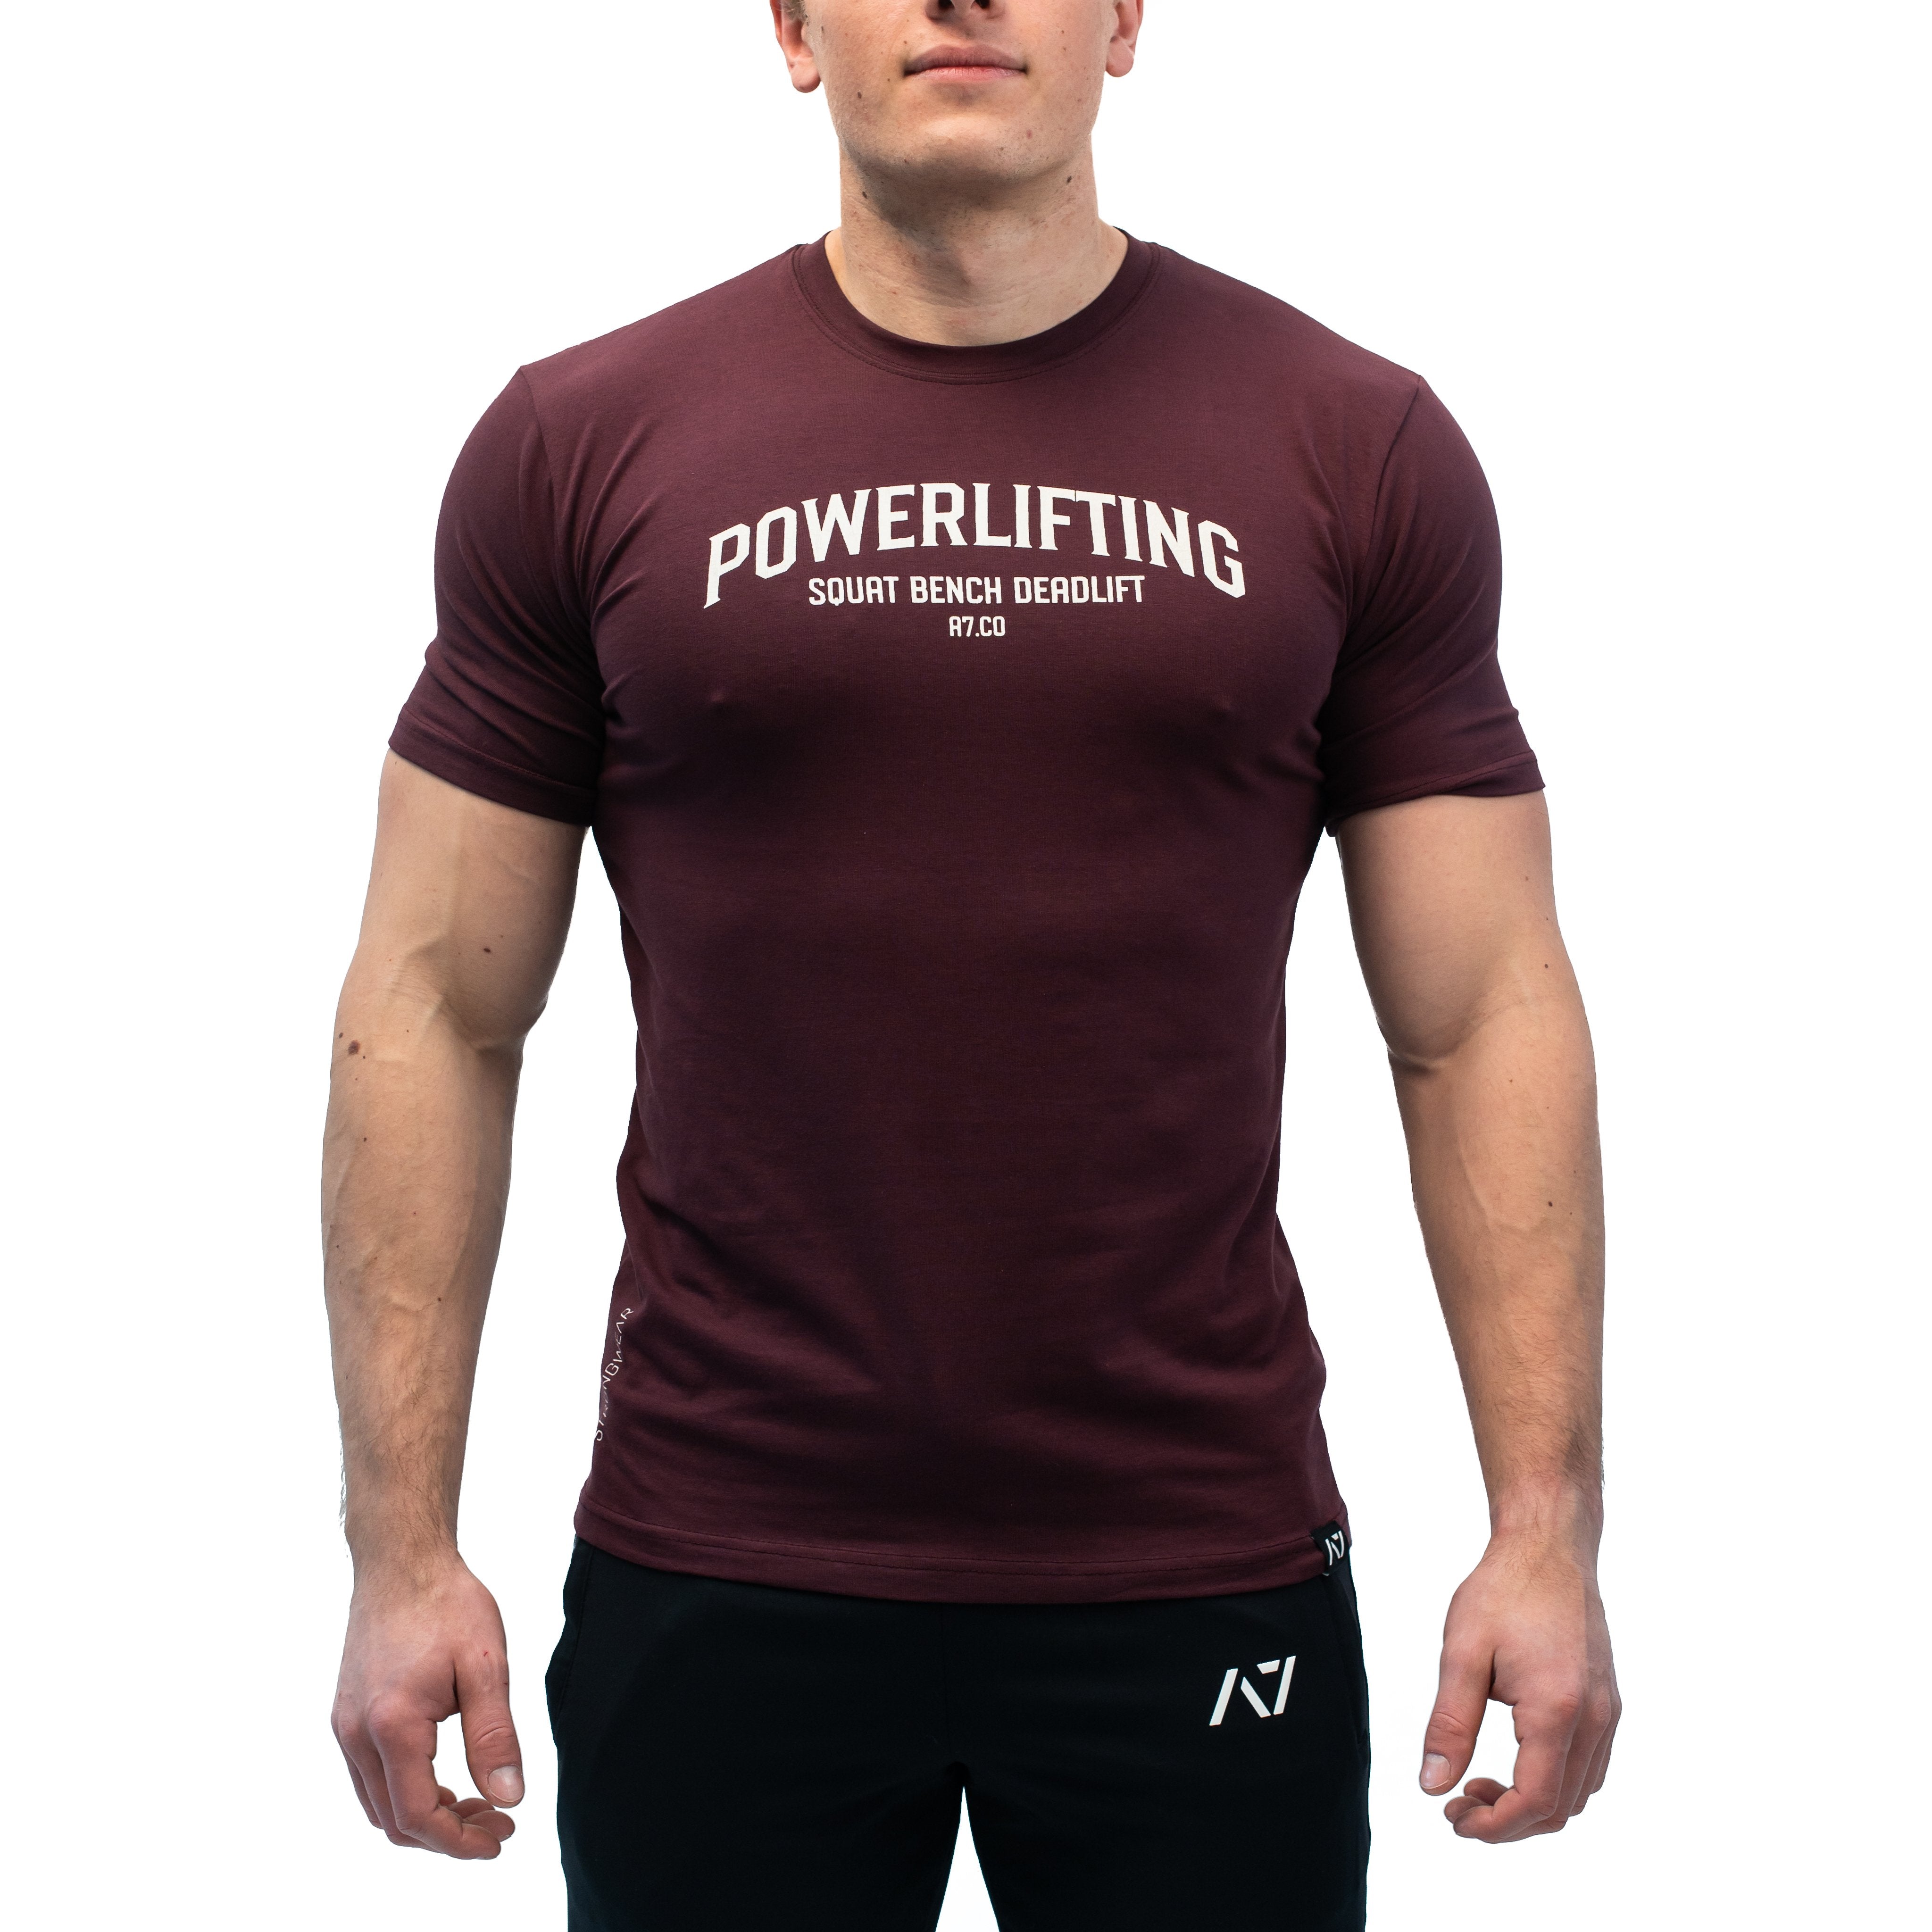  Powerliting Mahogany Bar Grip T-shirt, great as a squat shirt. Purchase  Powerliting Mahogany  Bar Grip tshirt UK from A7 UK. Purchase  Powerliting Mahogany Bar Grip Shirt Europe from A7 UK. No more chalk and no more sliding. Best Bar Grip Tshirts, shipping to UK and Europe from A7 UK. Stealth is our classic black on black shirt design! The best Powerlifting apparel for all your workouts. Available in UK and Europe including France, Italy, Germany, Sweden and Poland